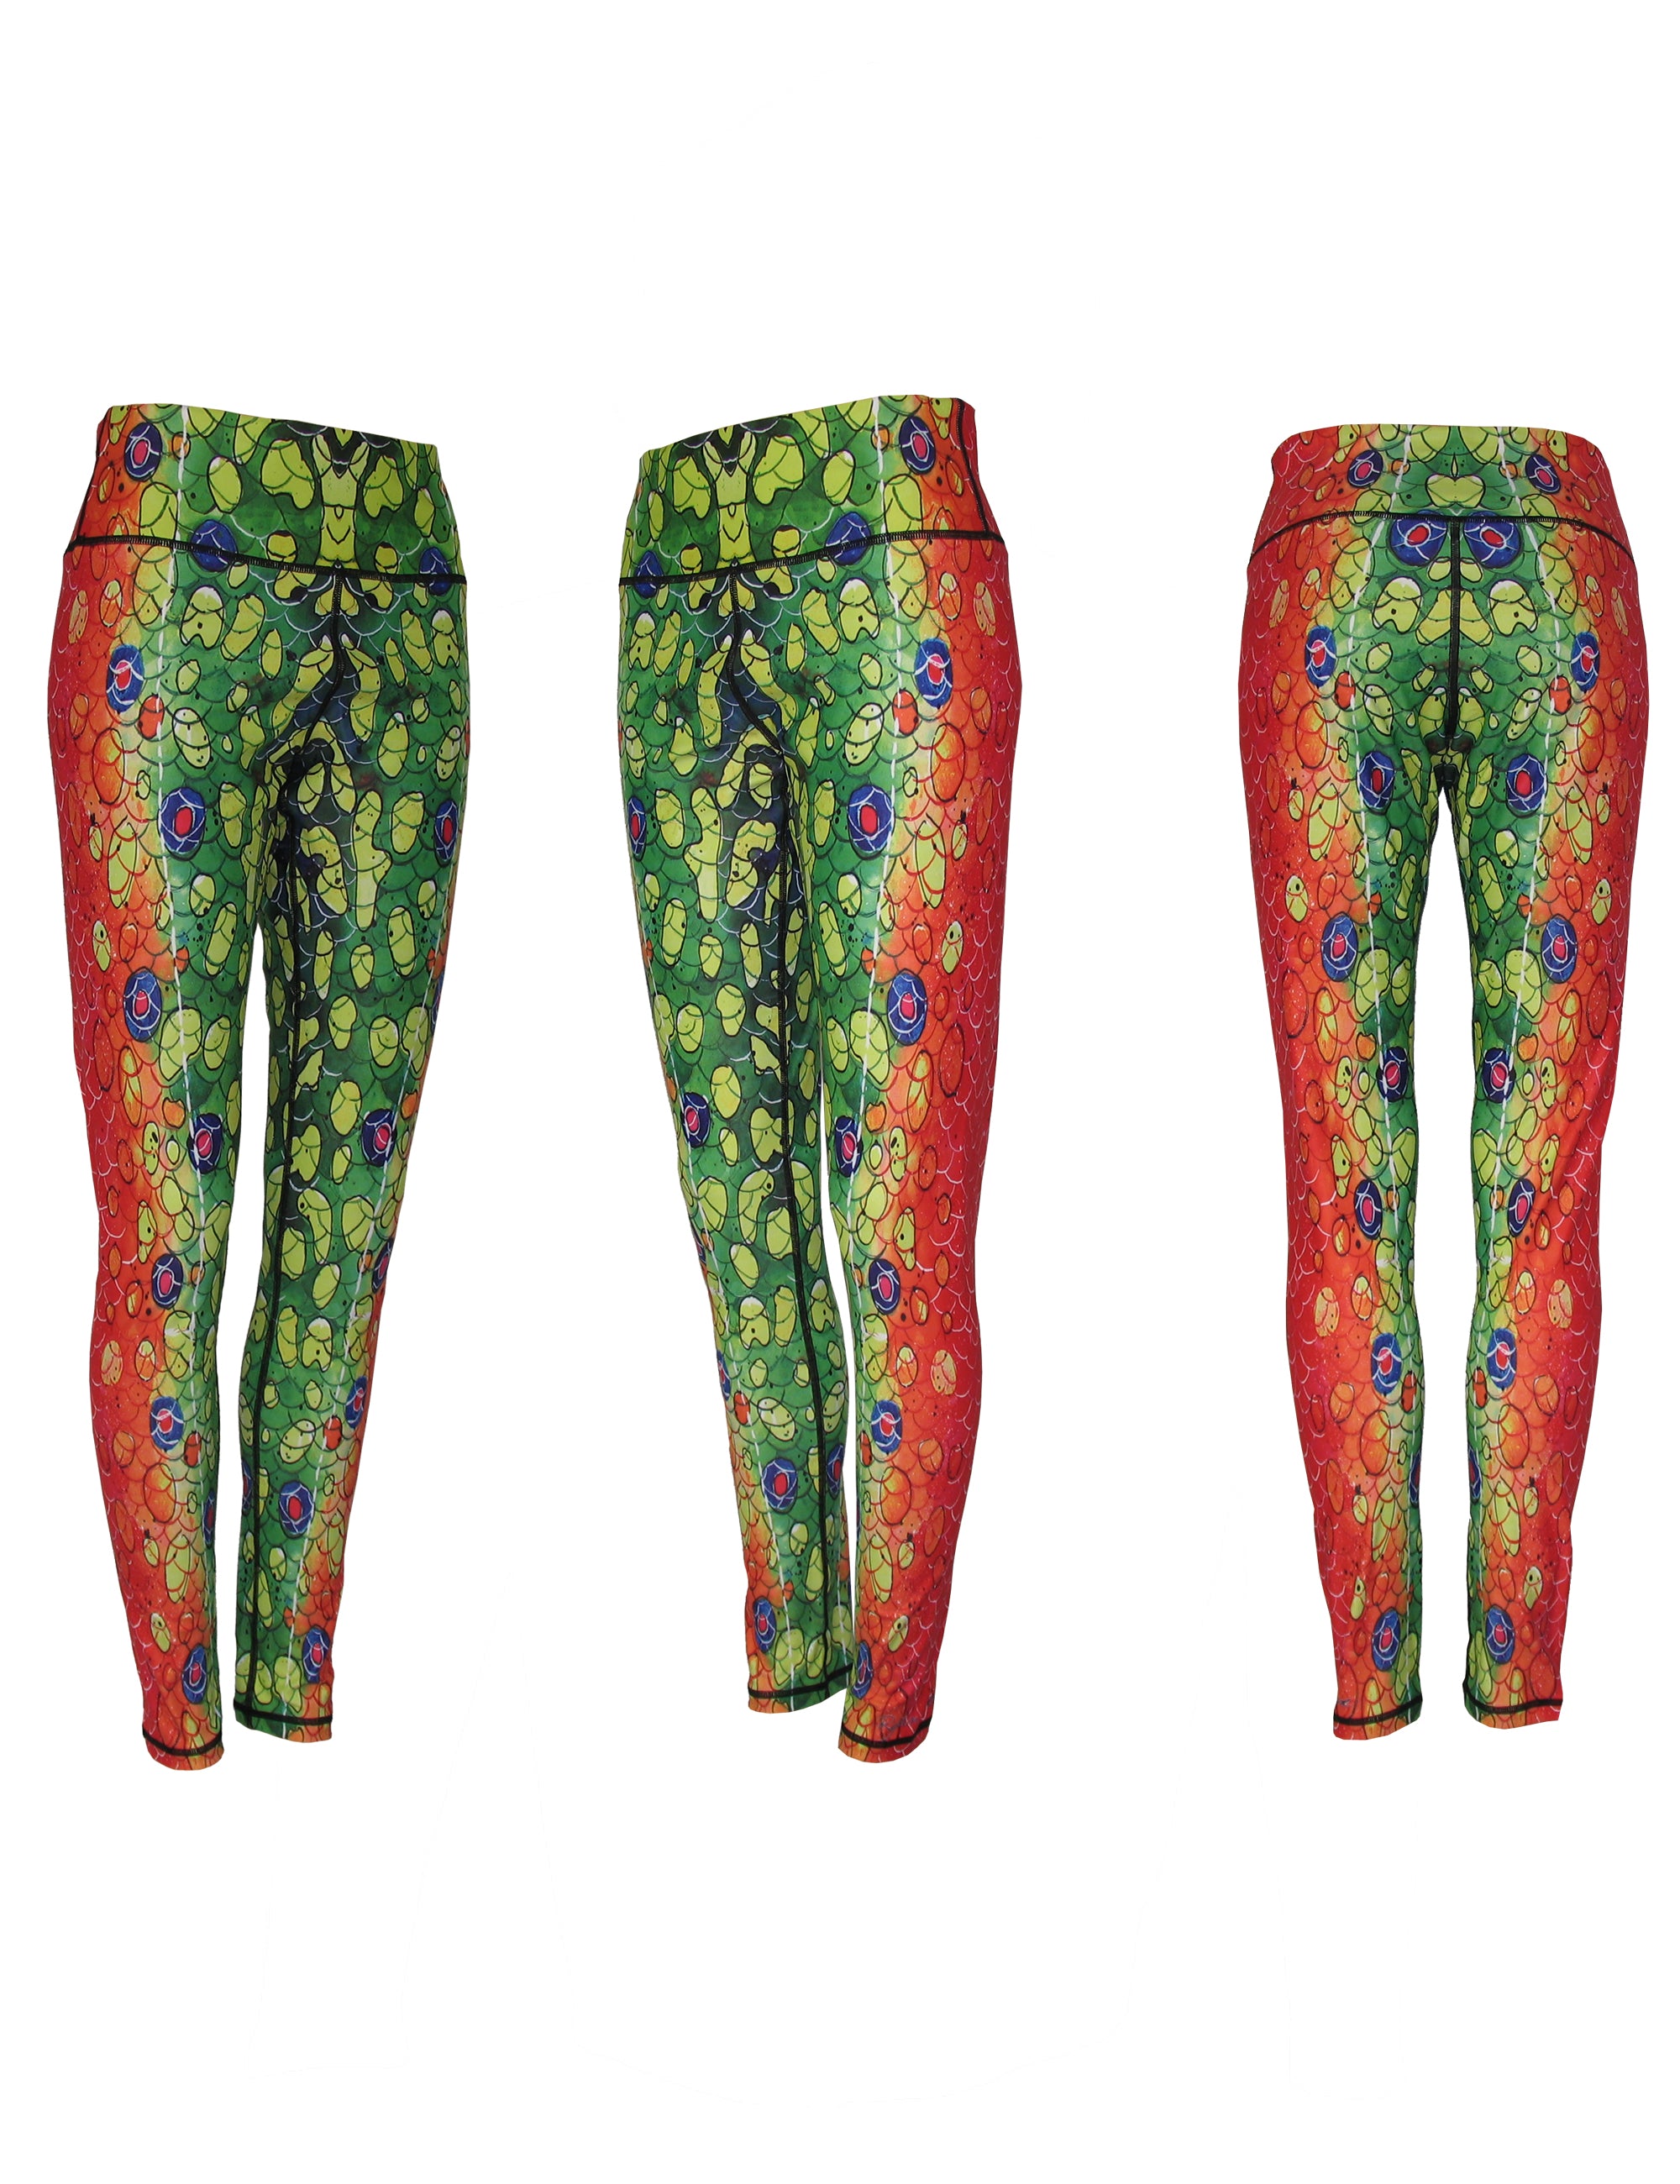 Trout Fishing Capri Leggings from Rockstarlette Outdoors Olive   Rockstarlette Outdoors, Adventure Inspired Activewear Made in USA